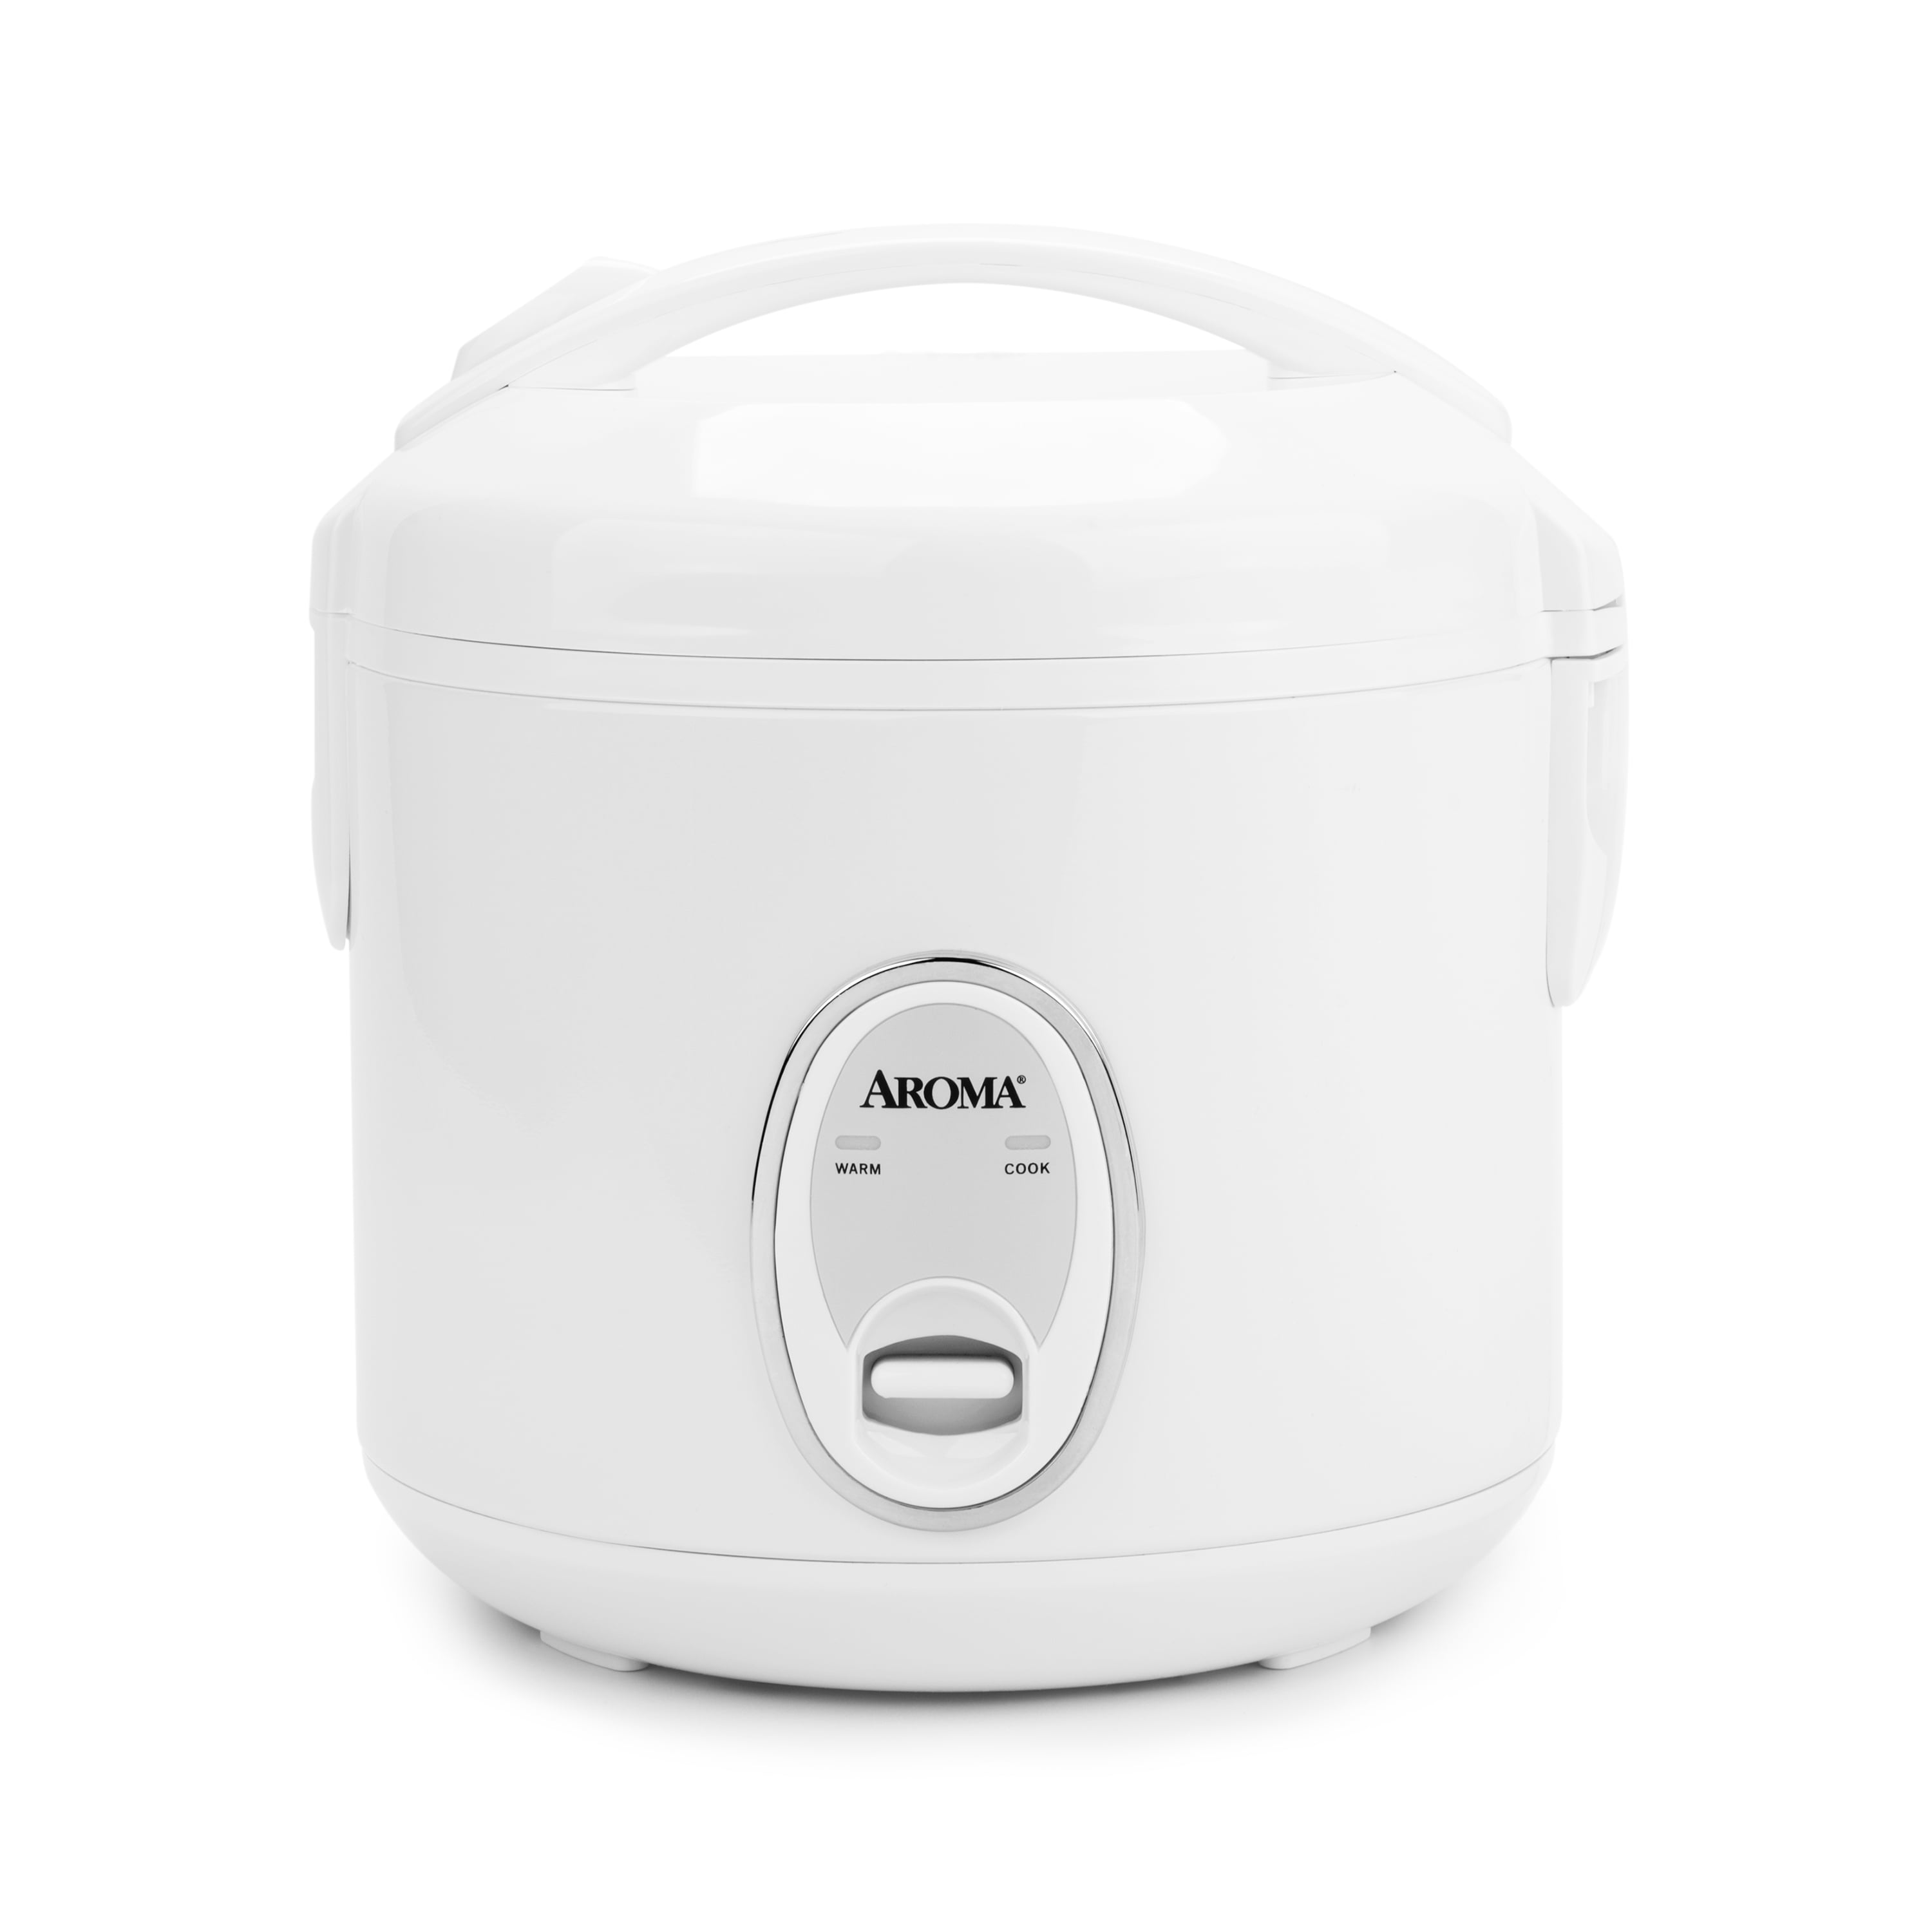 AROMA NutriWare Digital Pot Style 7-Cup Rice Cooker with Glass Lid and  Non-Stick Pot NRC-687SD-1SG - The Home Depot